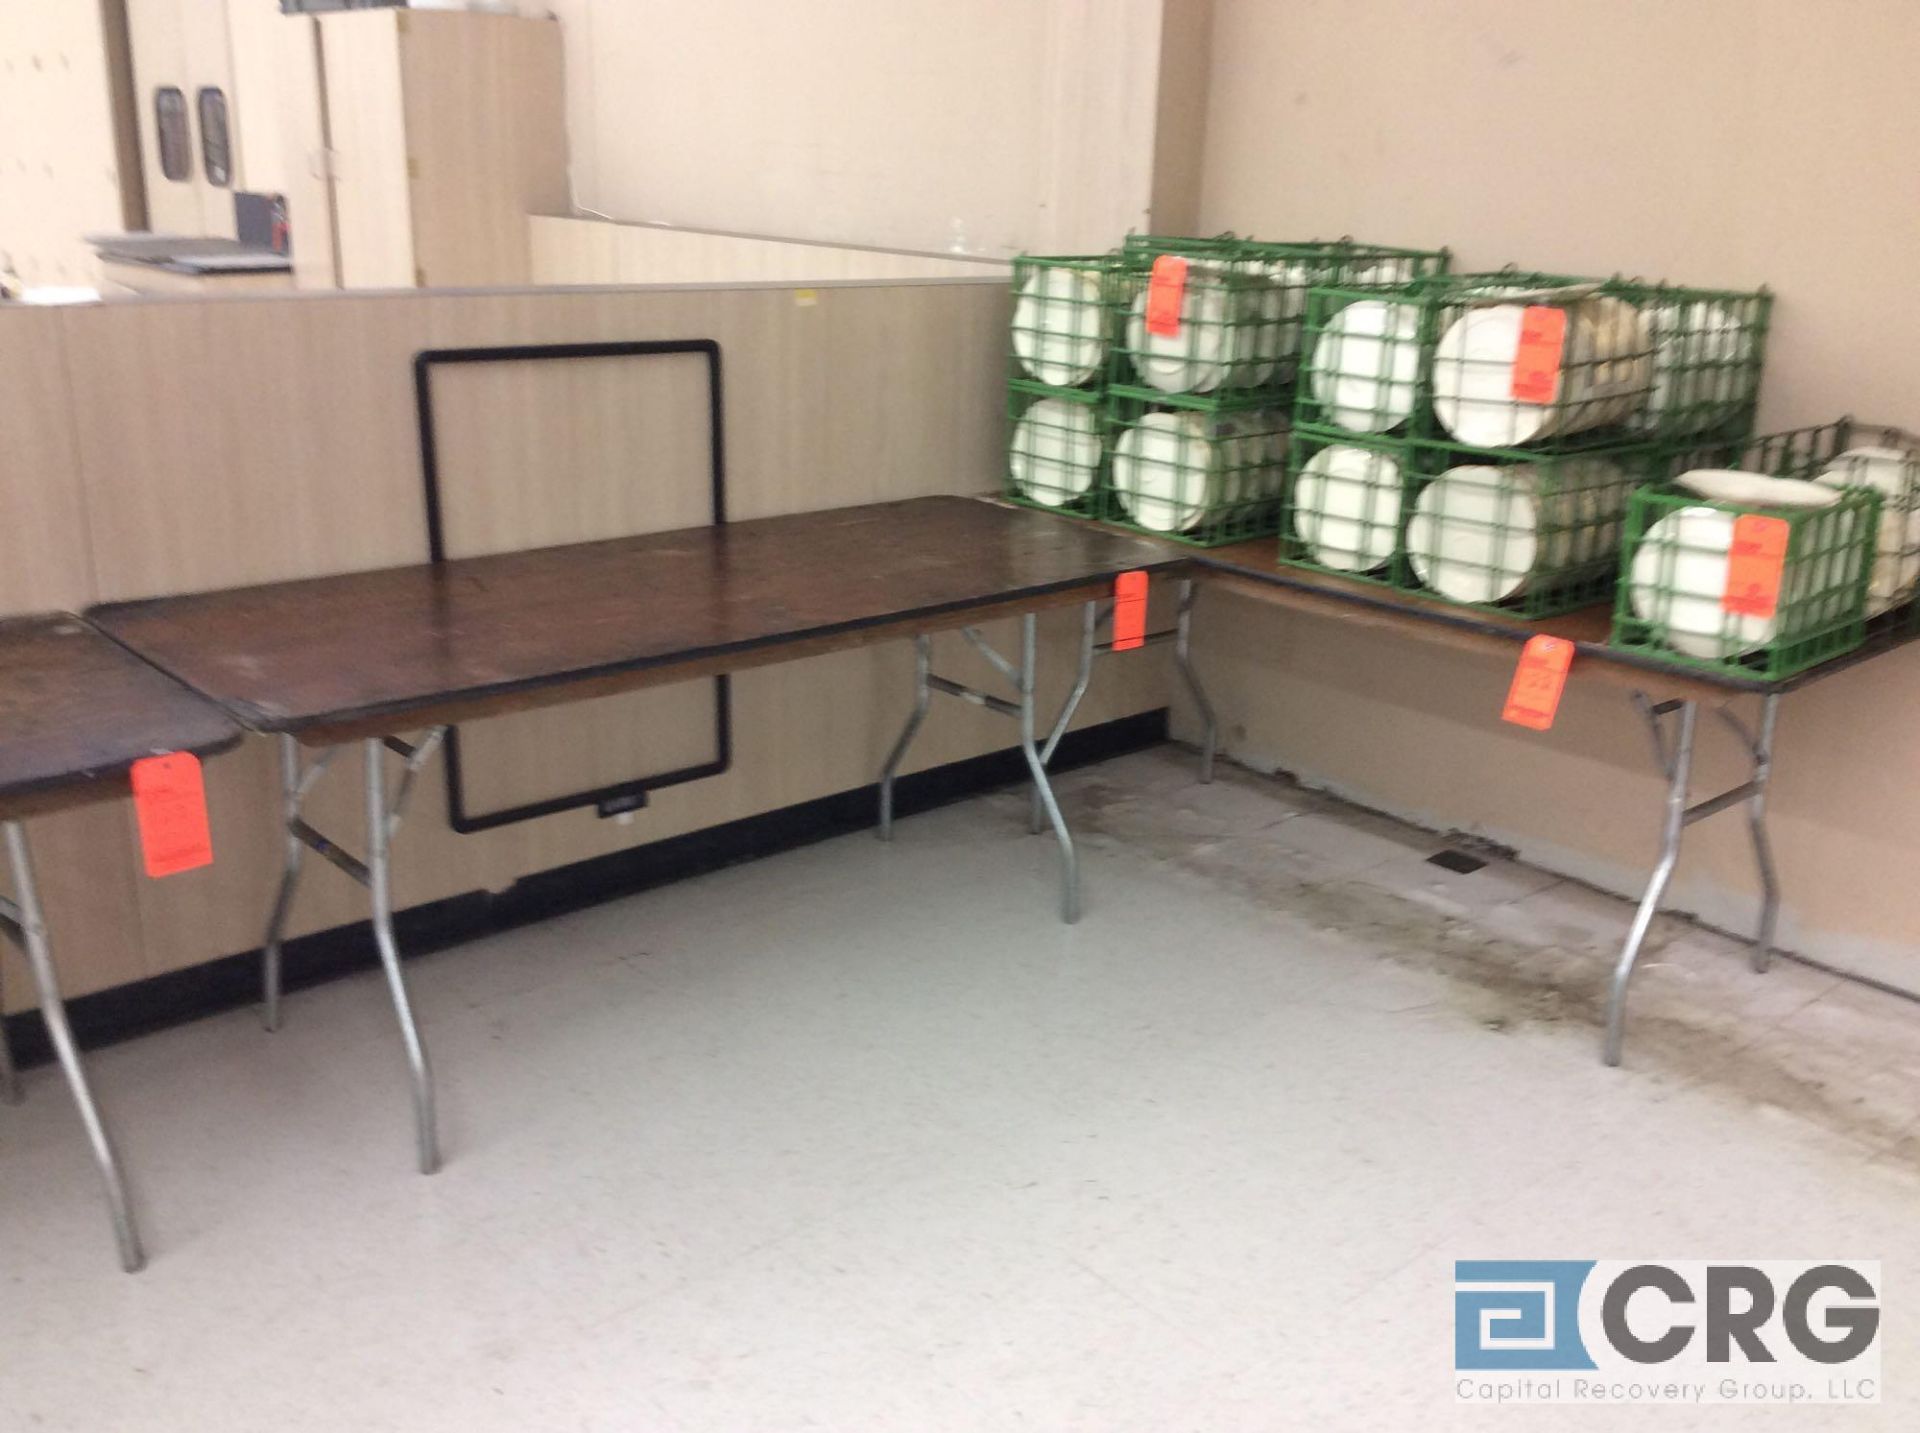 Lot of (22) assorted 30" x 72" folding leg tables. Does not include any contents displayed on them. - Image 2 of 4